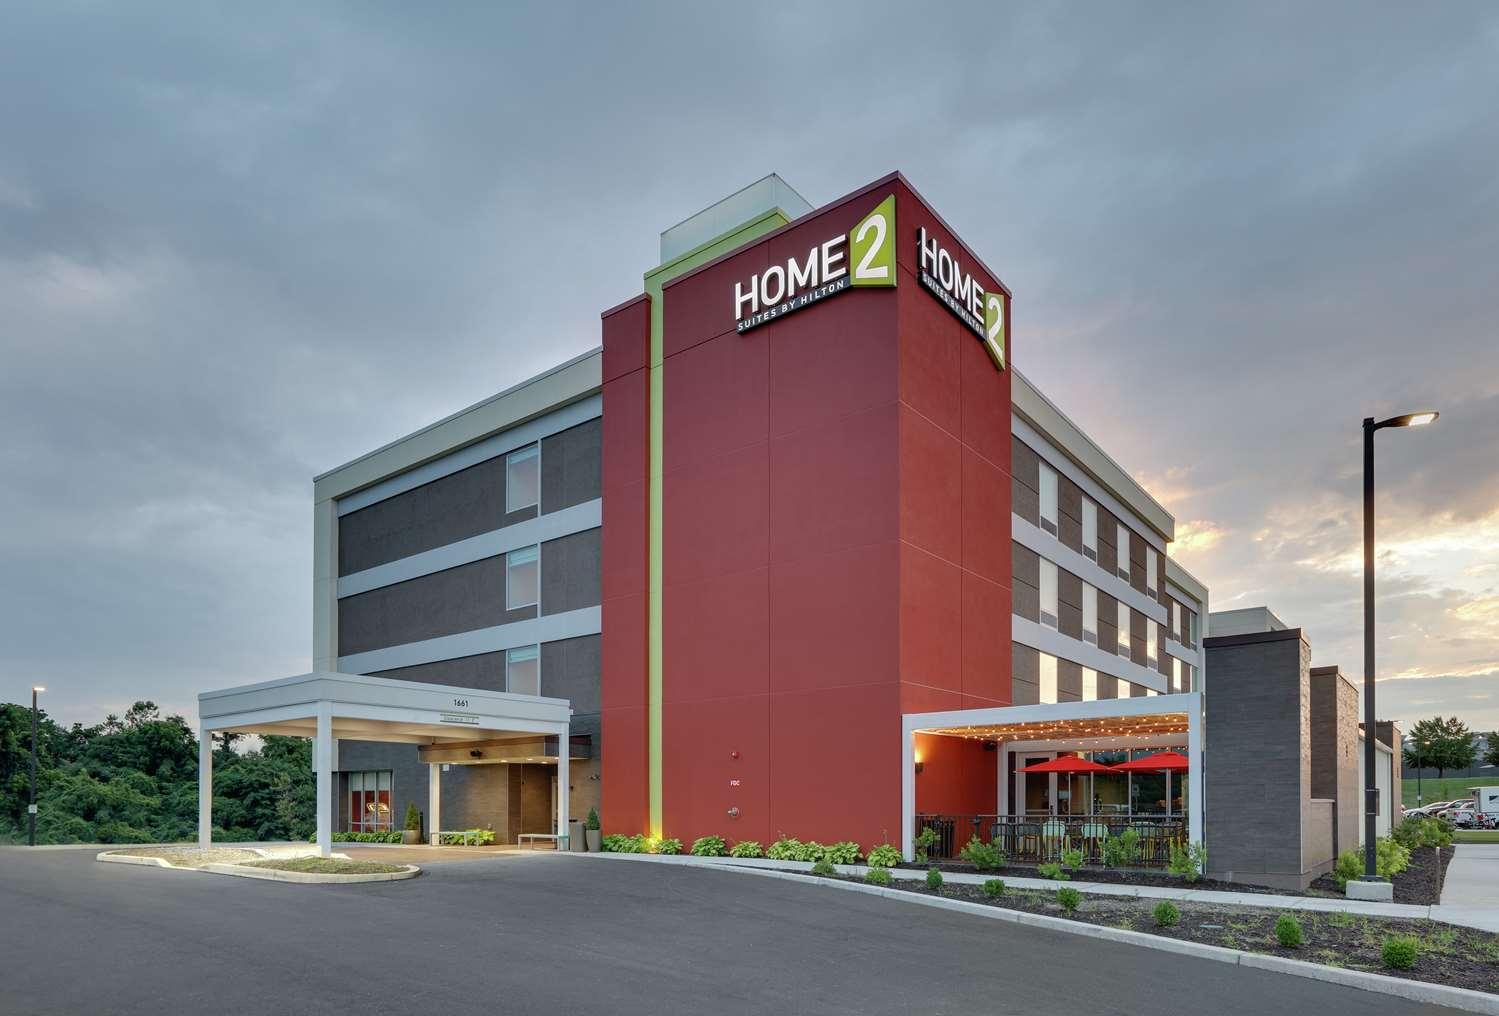 Home2 Suites by Hilton Hagerstown in Hagerstown, MD